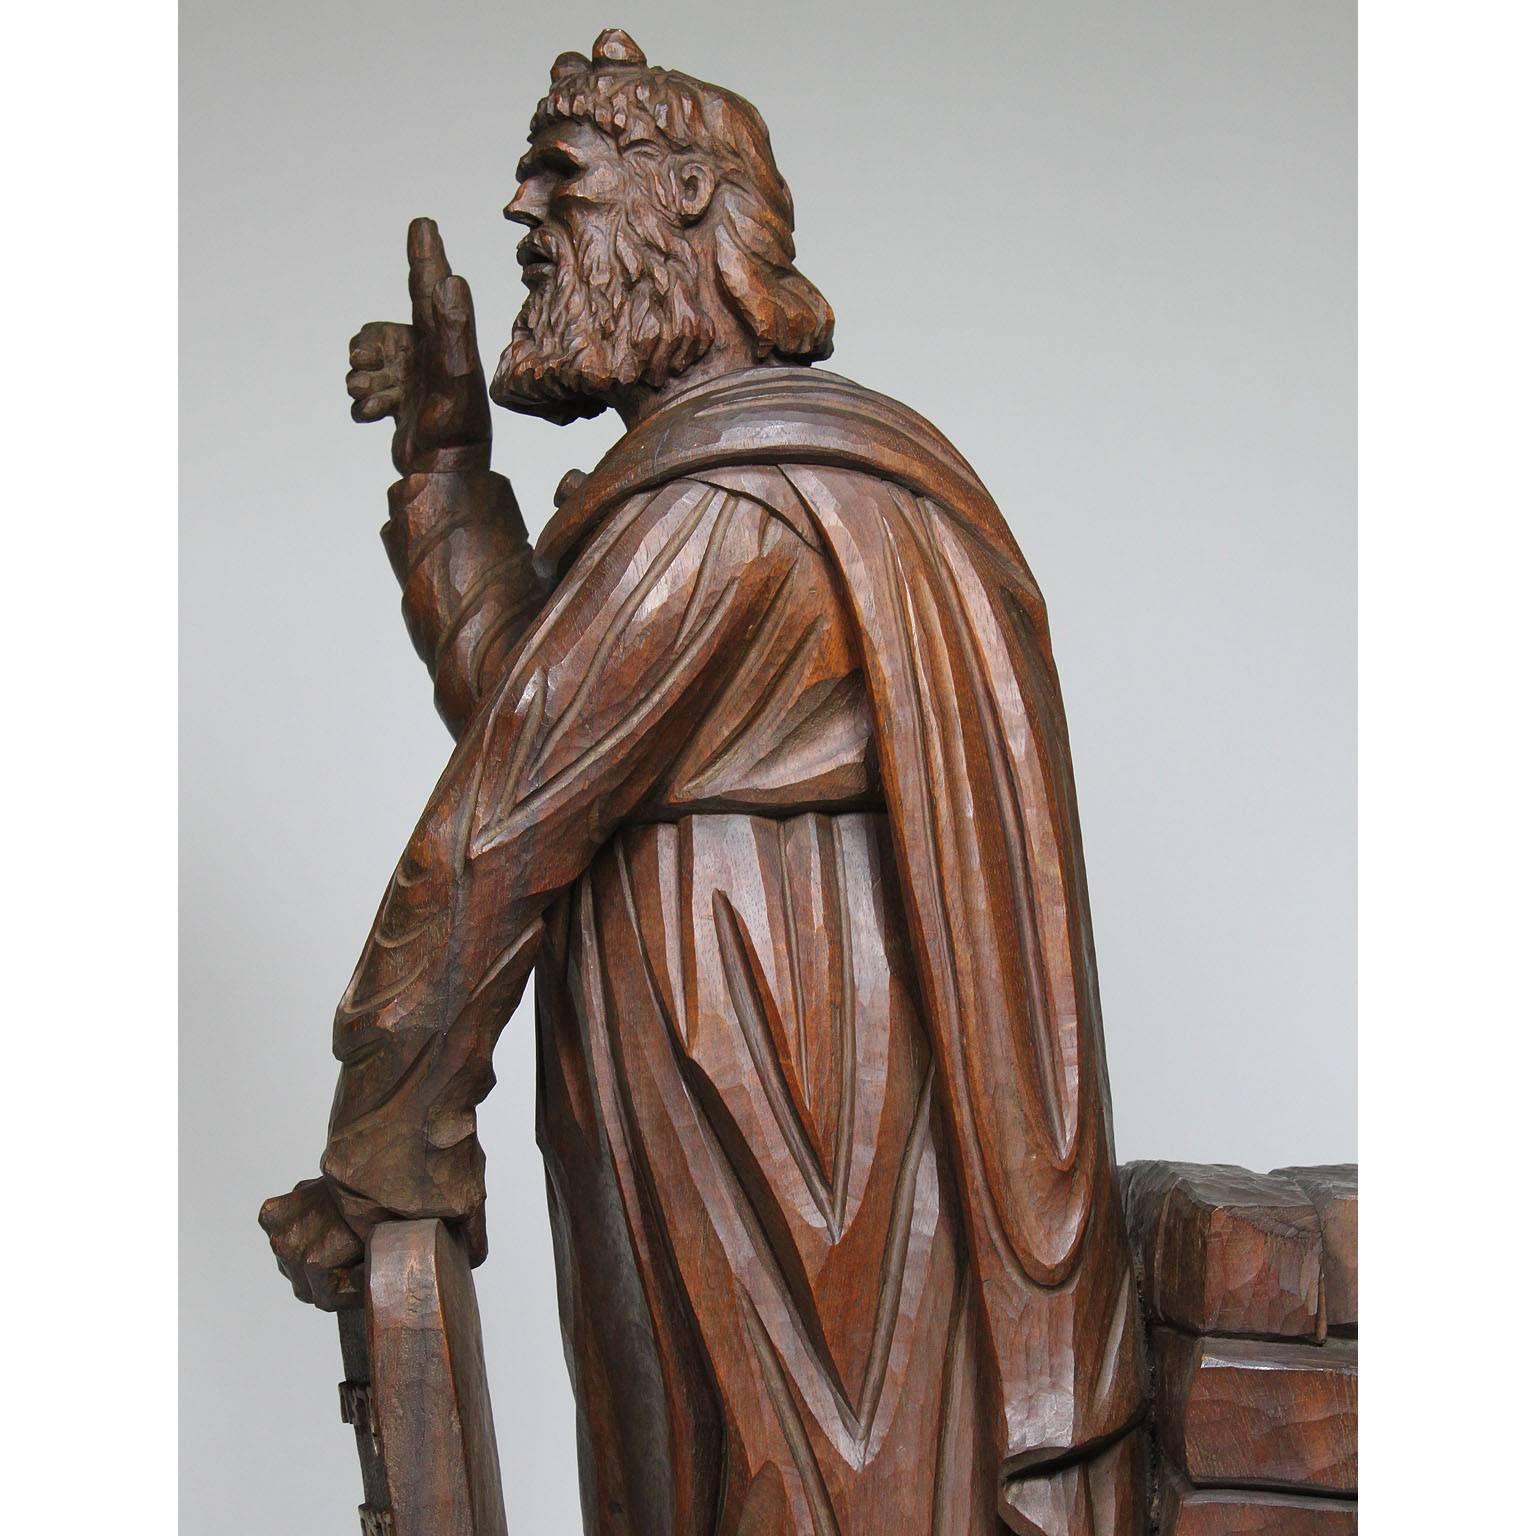 Spanish 19th-20th Century Renaissance Carved Wood Judica Figure of Michelangelo's Moses For Sale